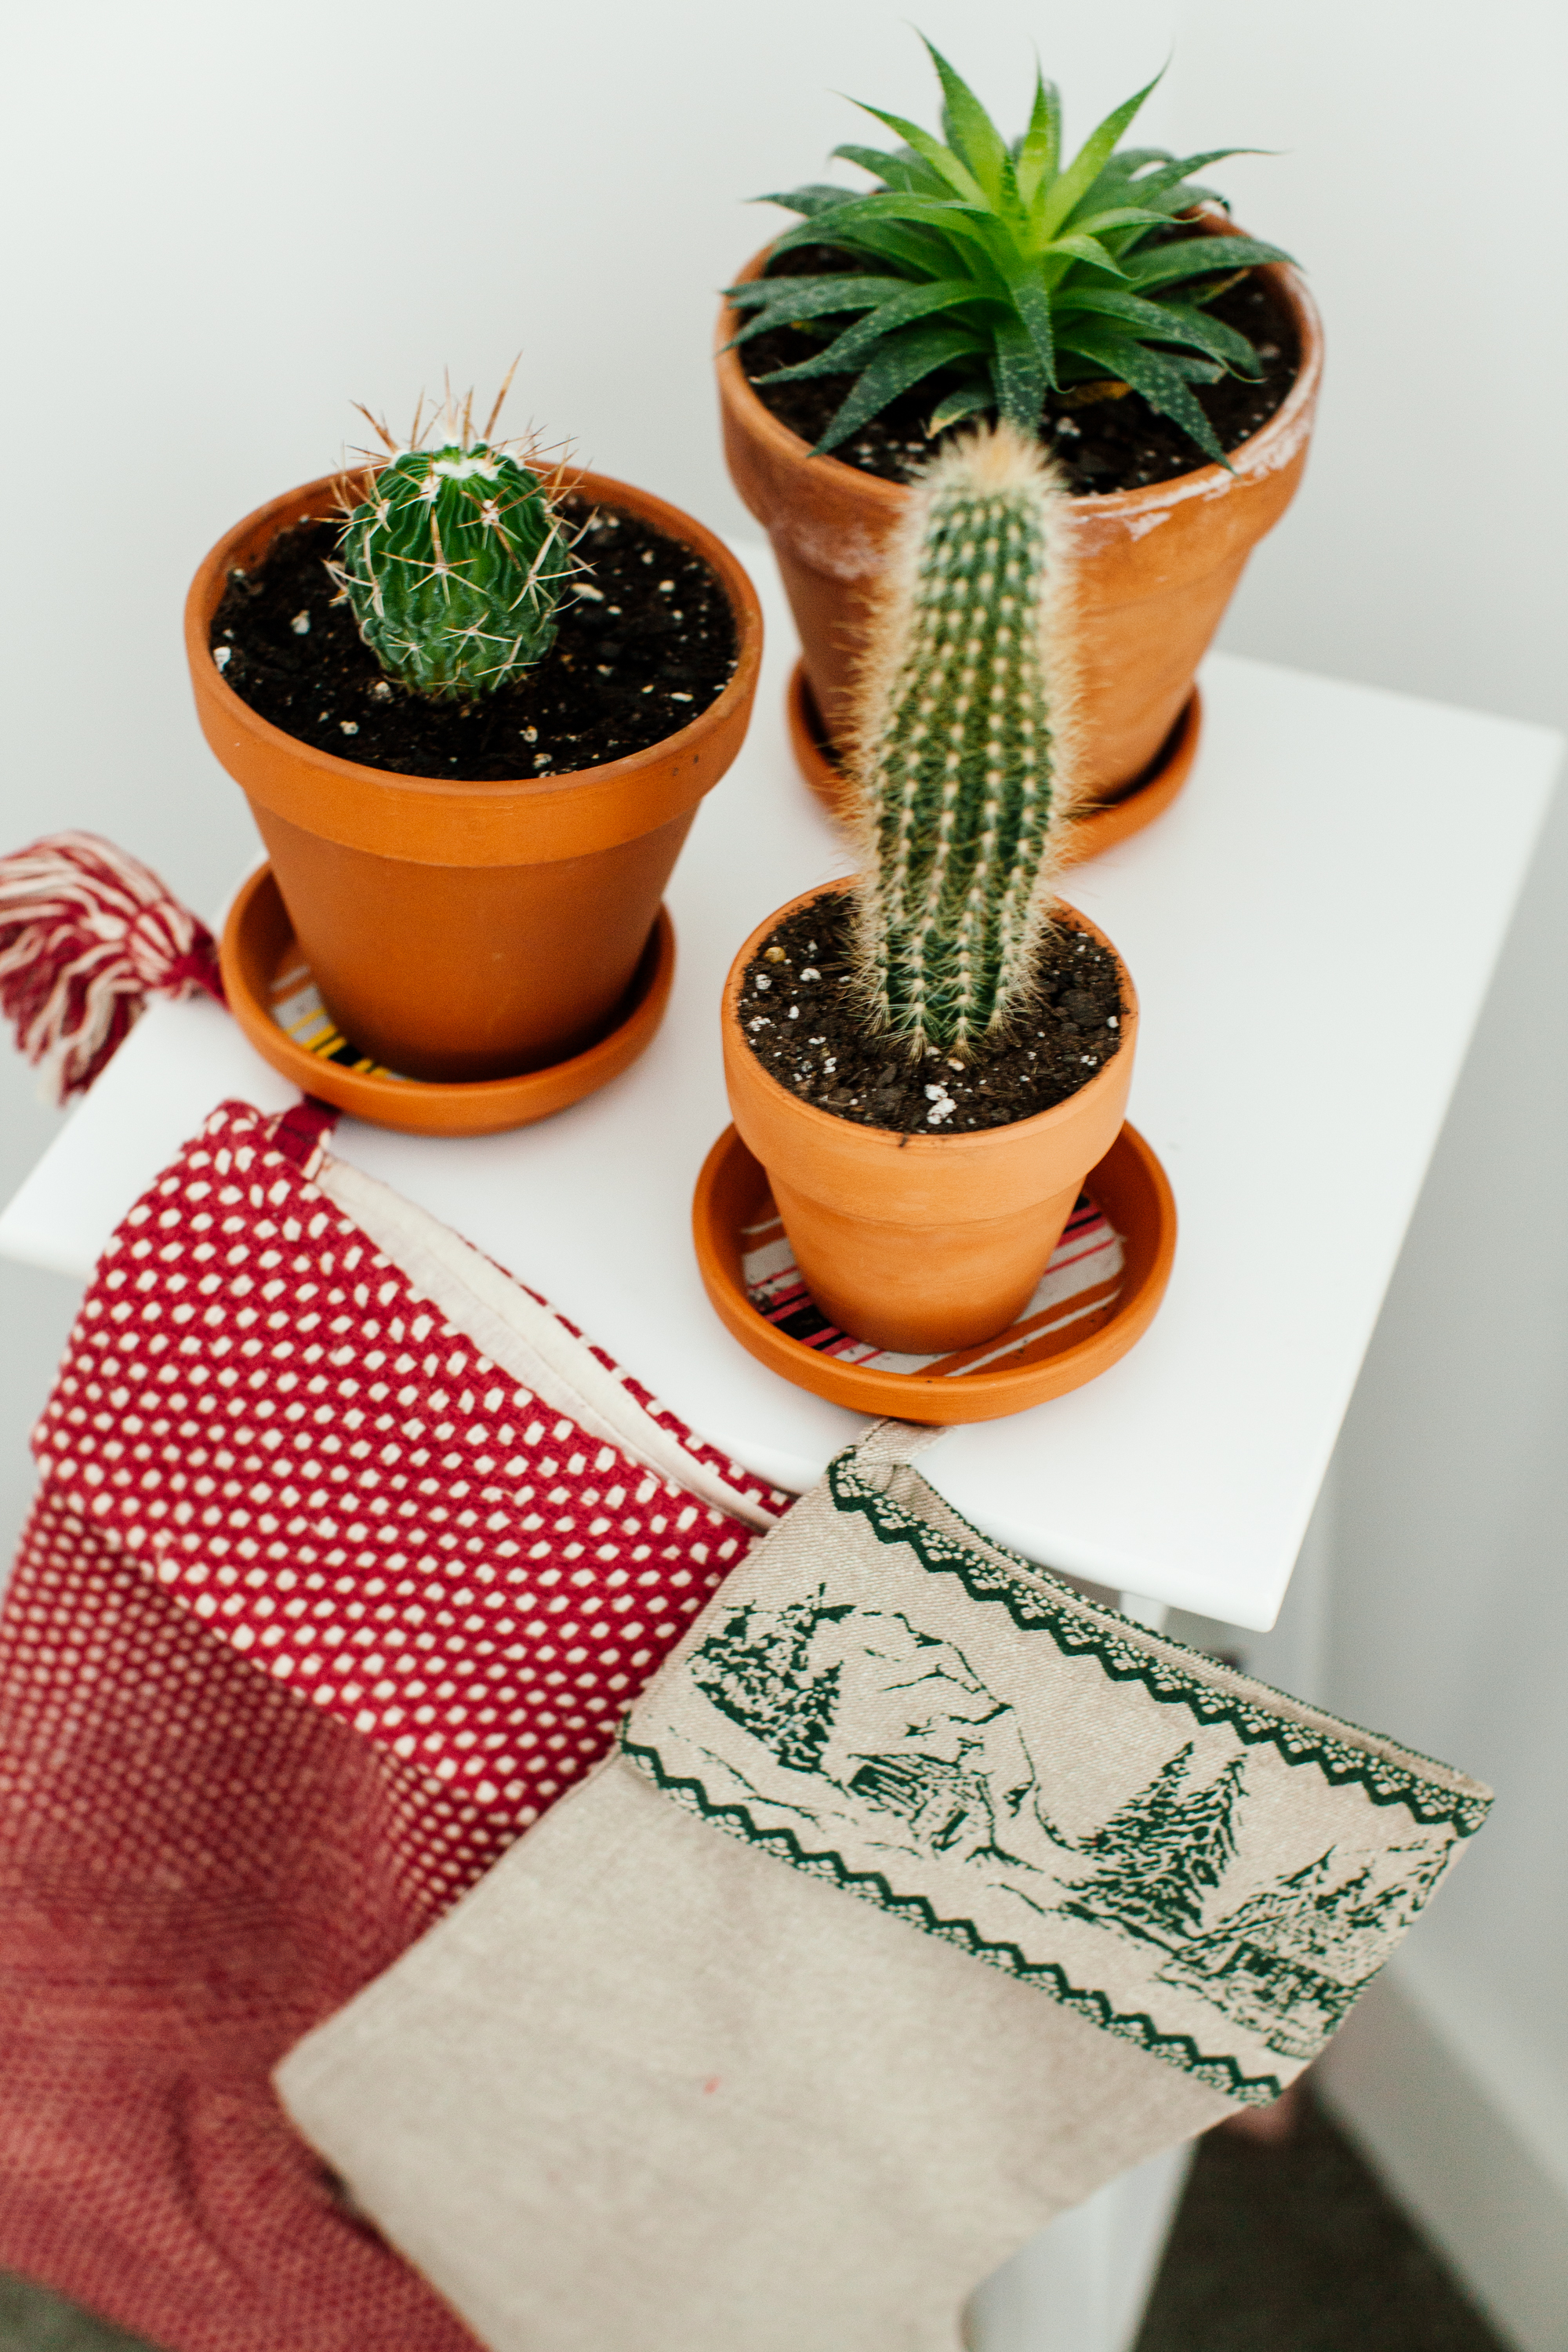 Celebrating our holiday traditions with the sweetest Wayfair holiday/Christmas stockings. | www.bygabriella.co